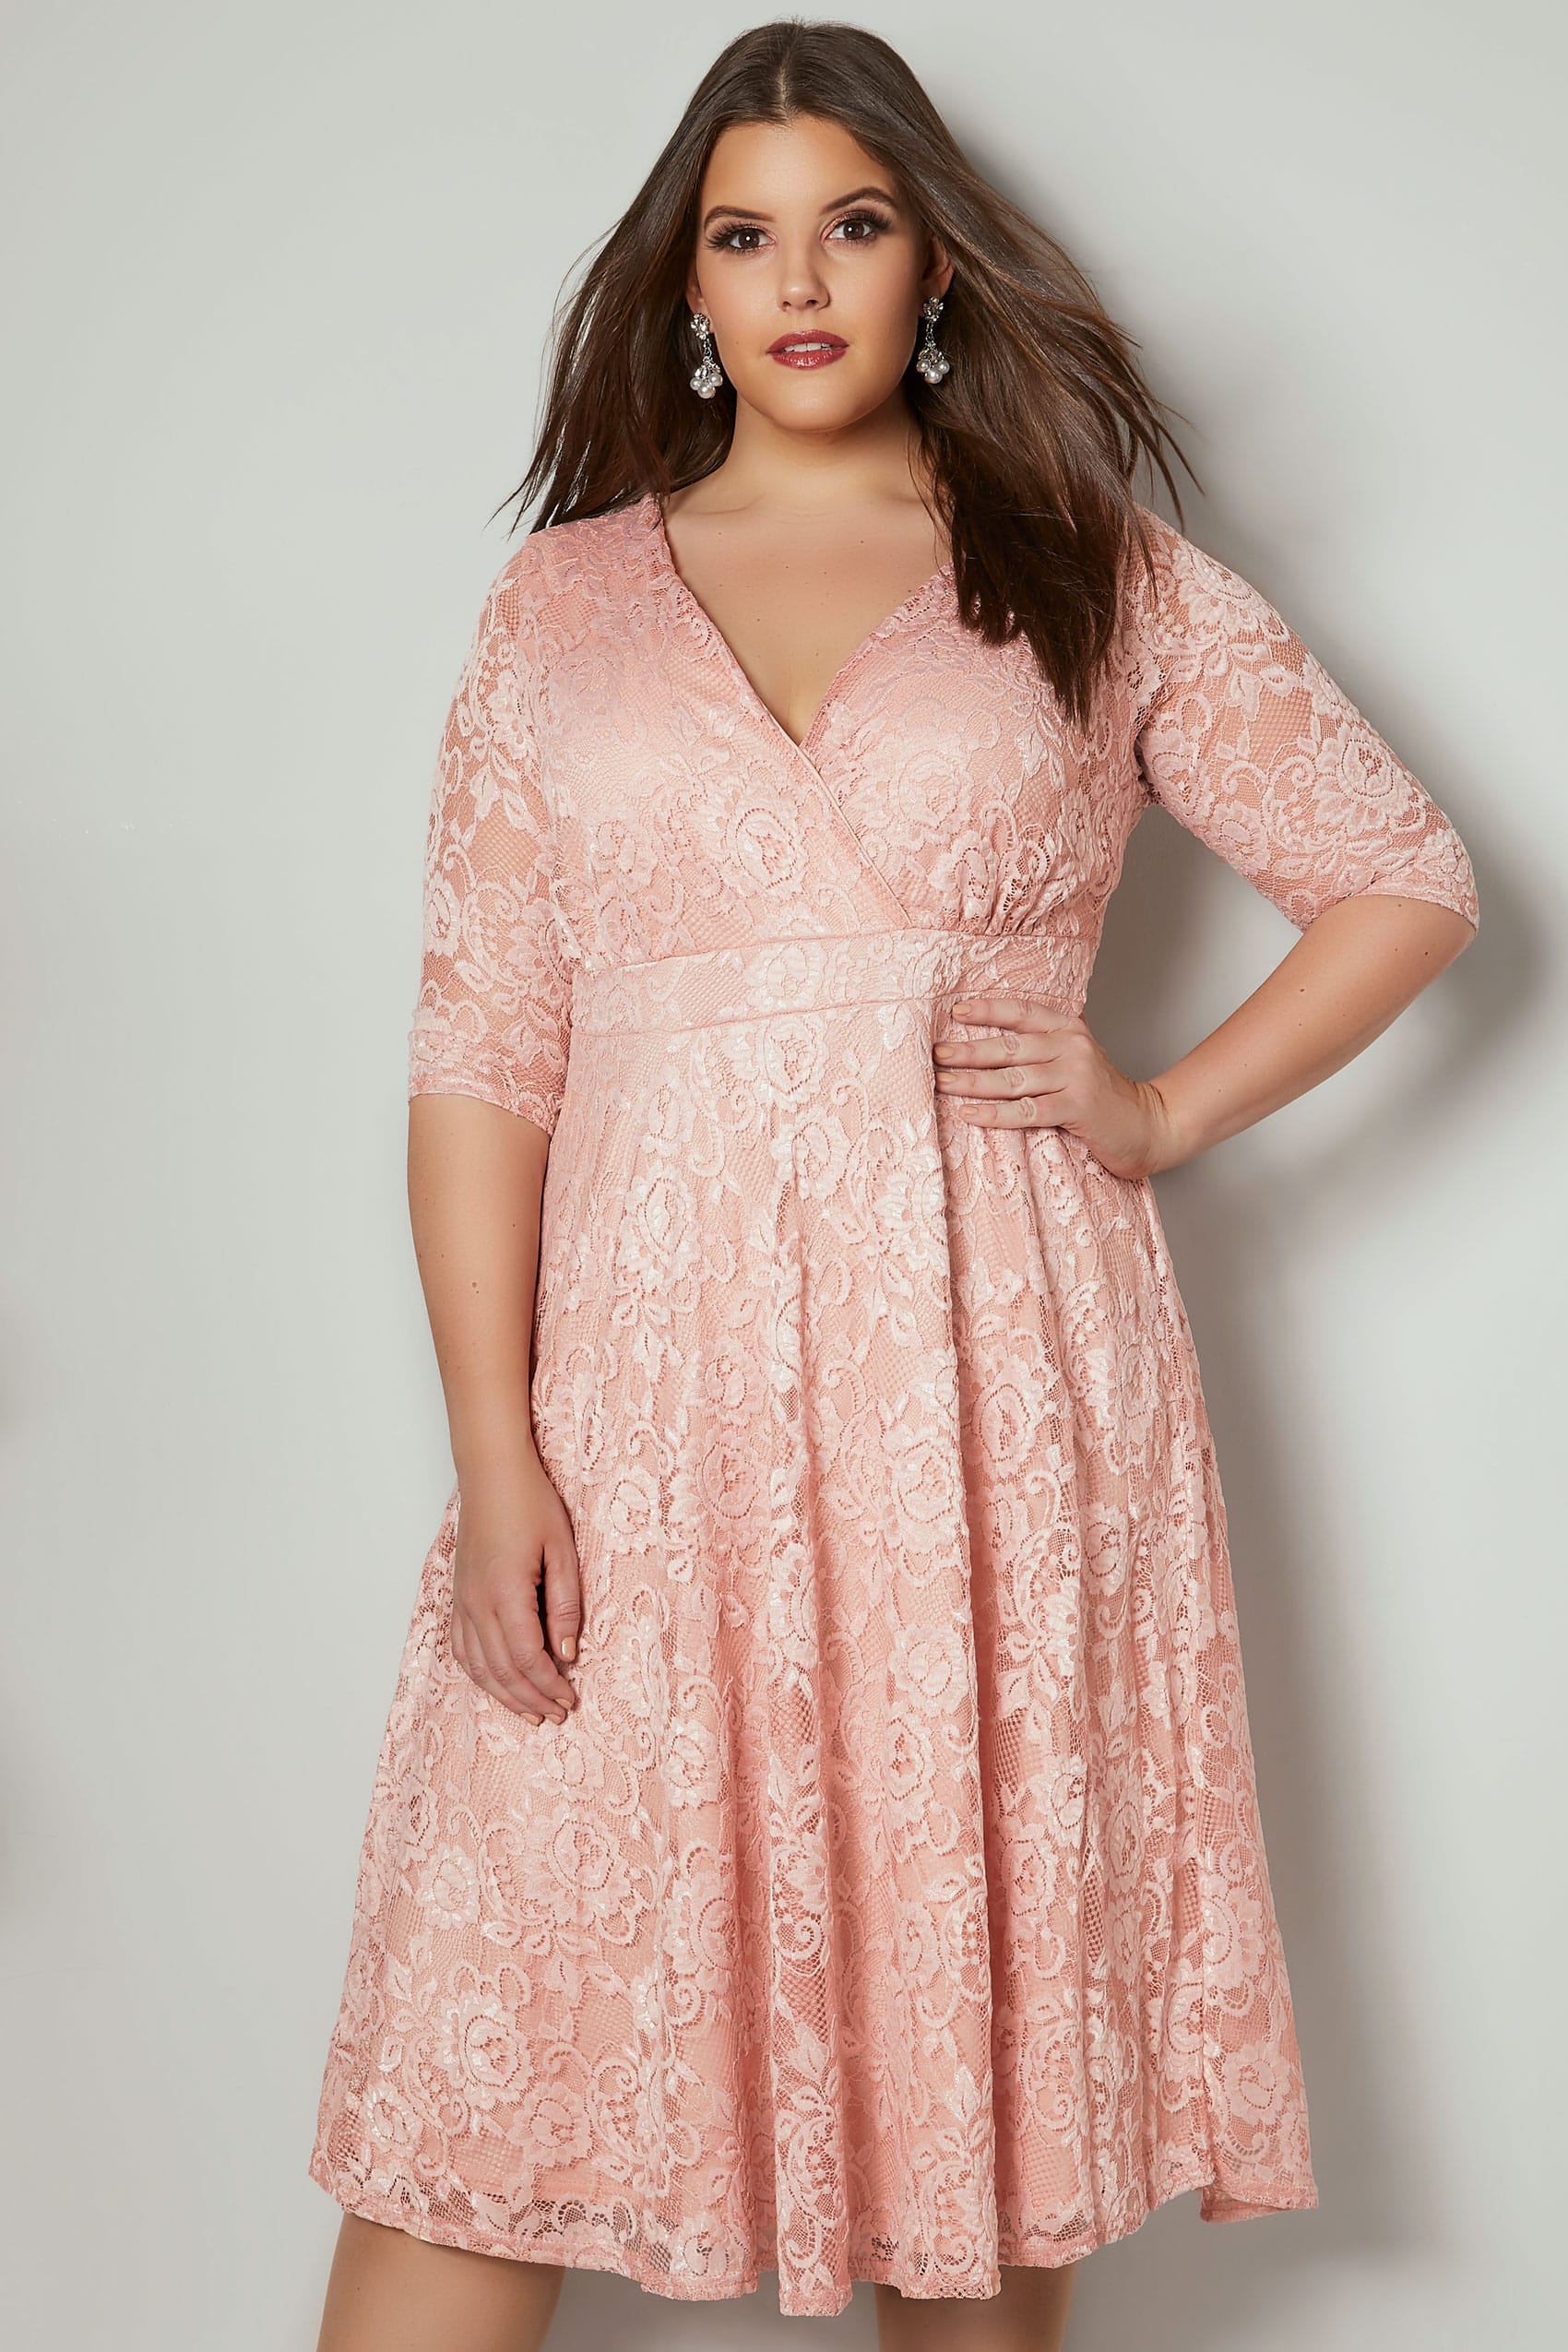 YOURS LONDON Pink  Floral Lace Wrap Dress  plus  size  16 to 32